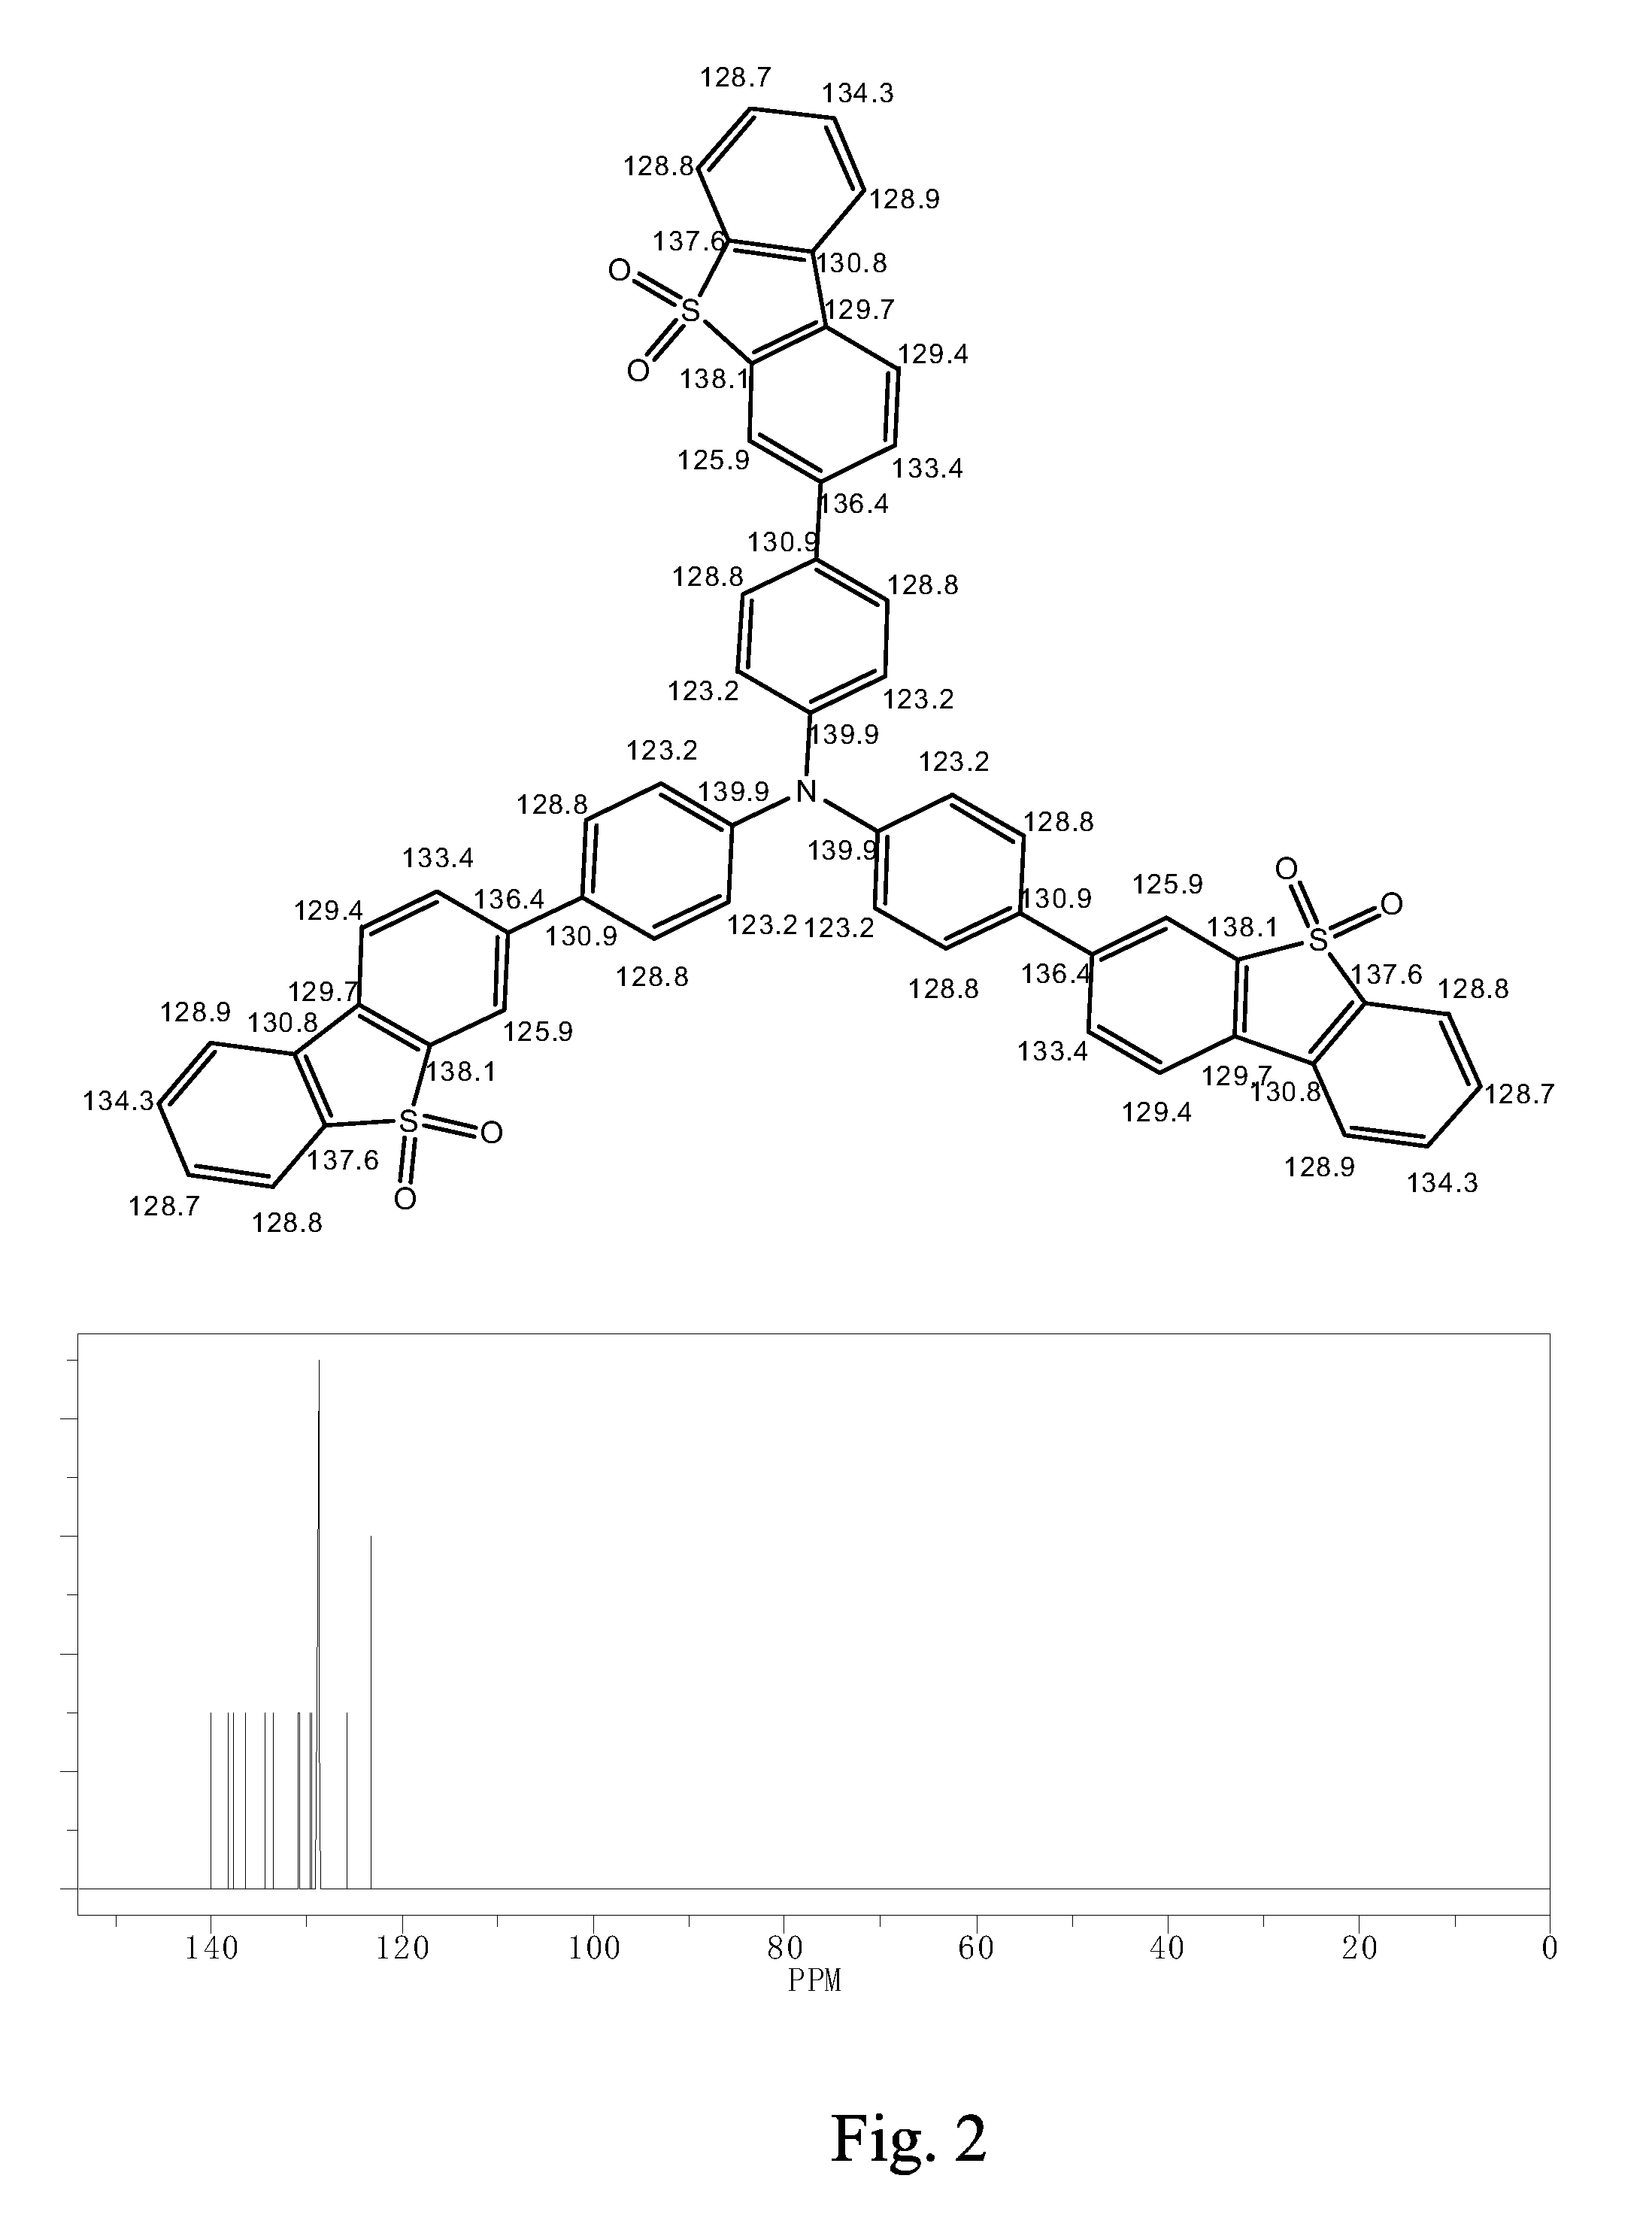 A Sulfone Group-Containing Compound, An Organic Light Emitting Diode (OLED) Device Using The Same, and A Method of Fabricating the OLED Device